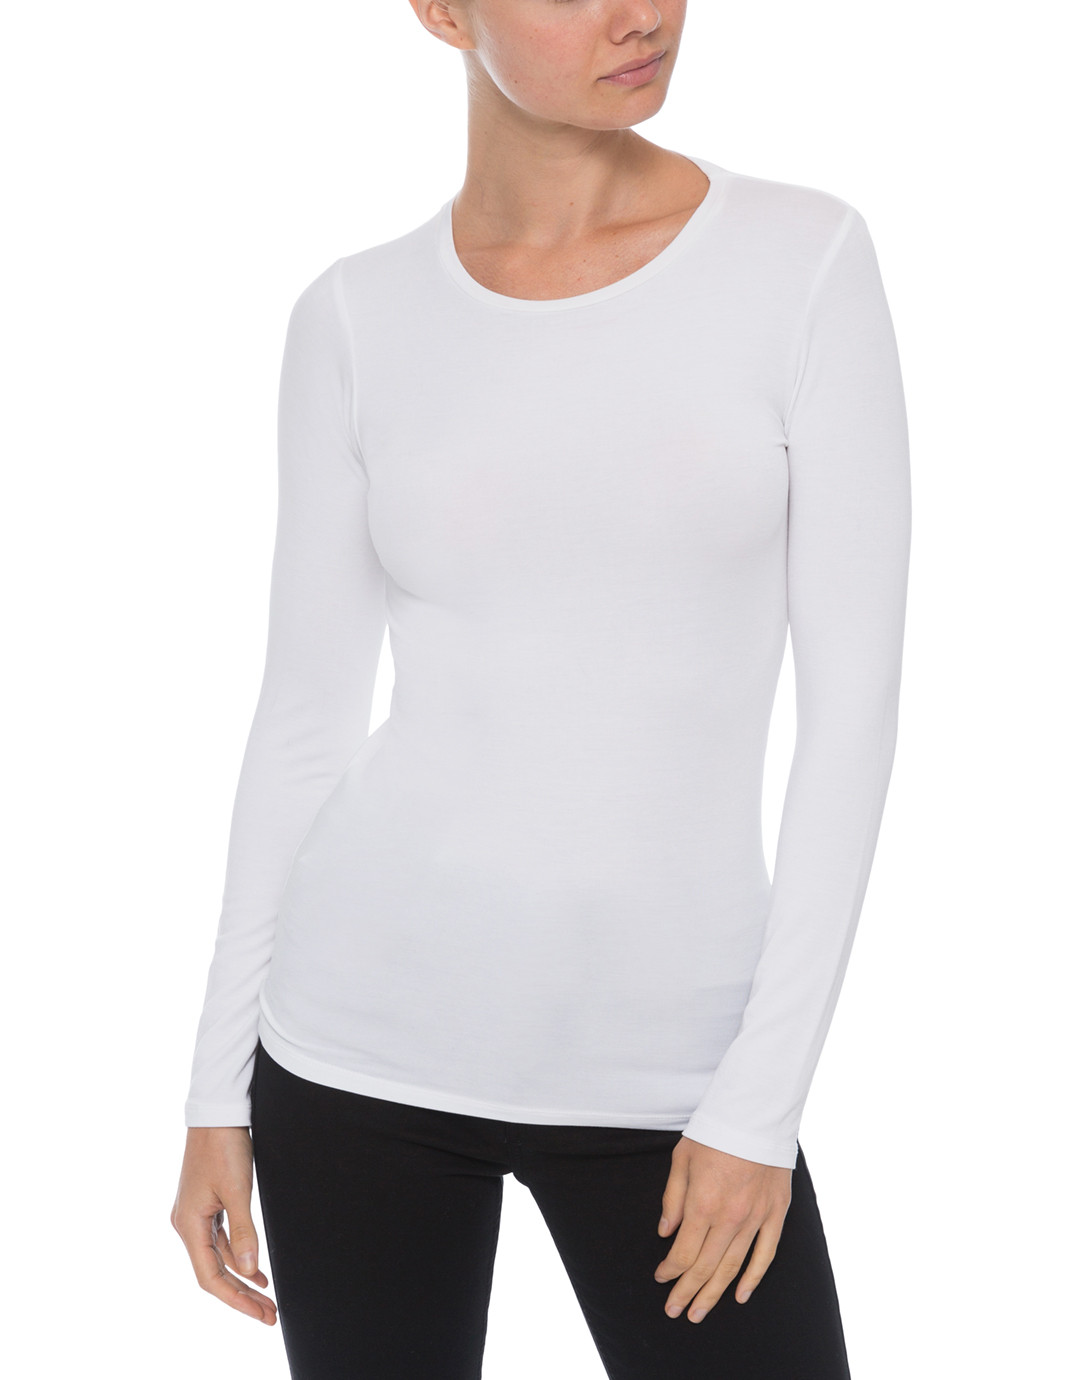 White Crew Neck Long-Sleeved Stretch Viscose Top